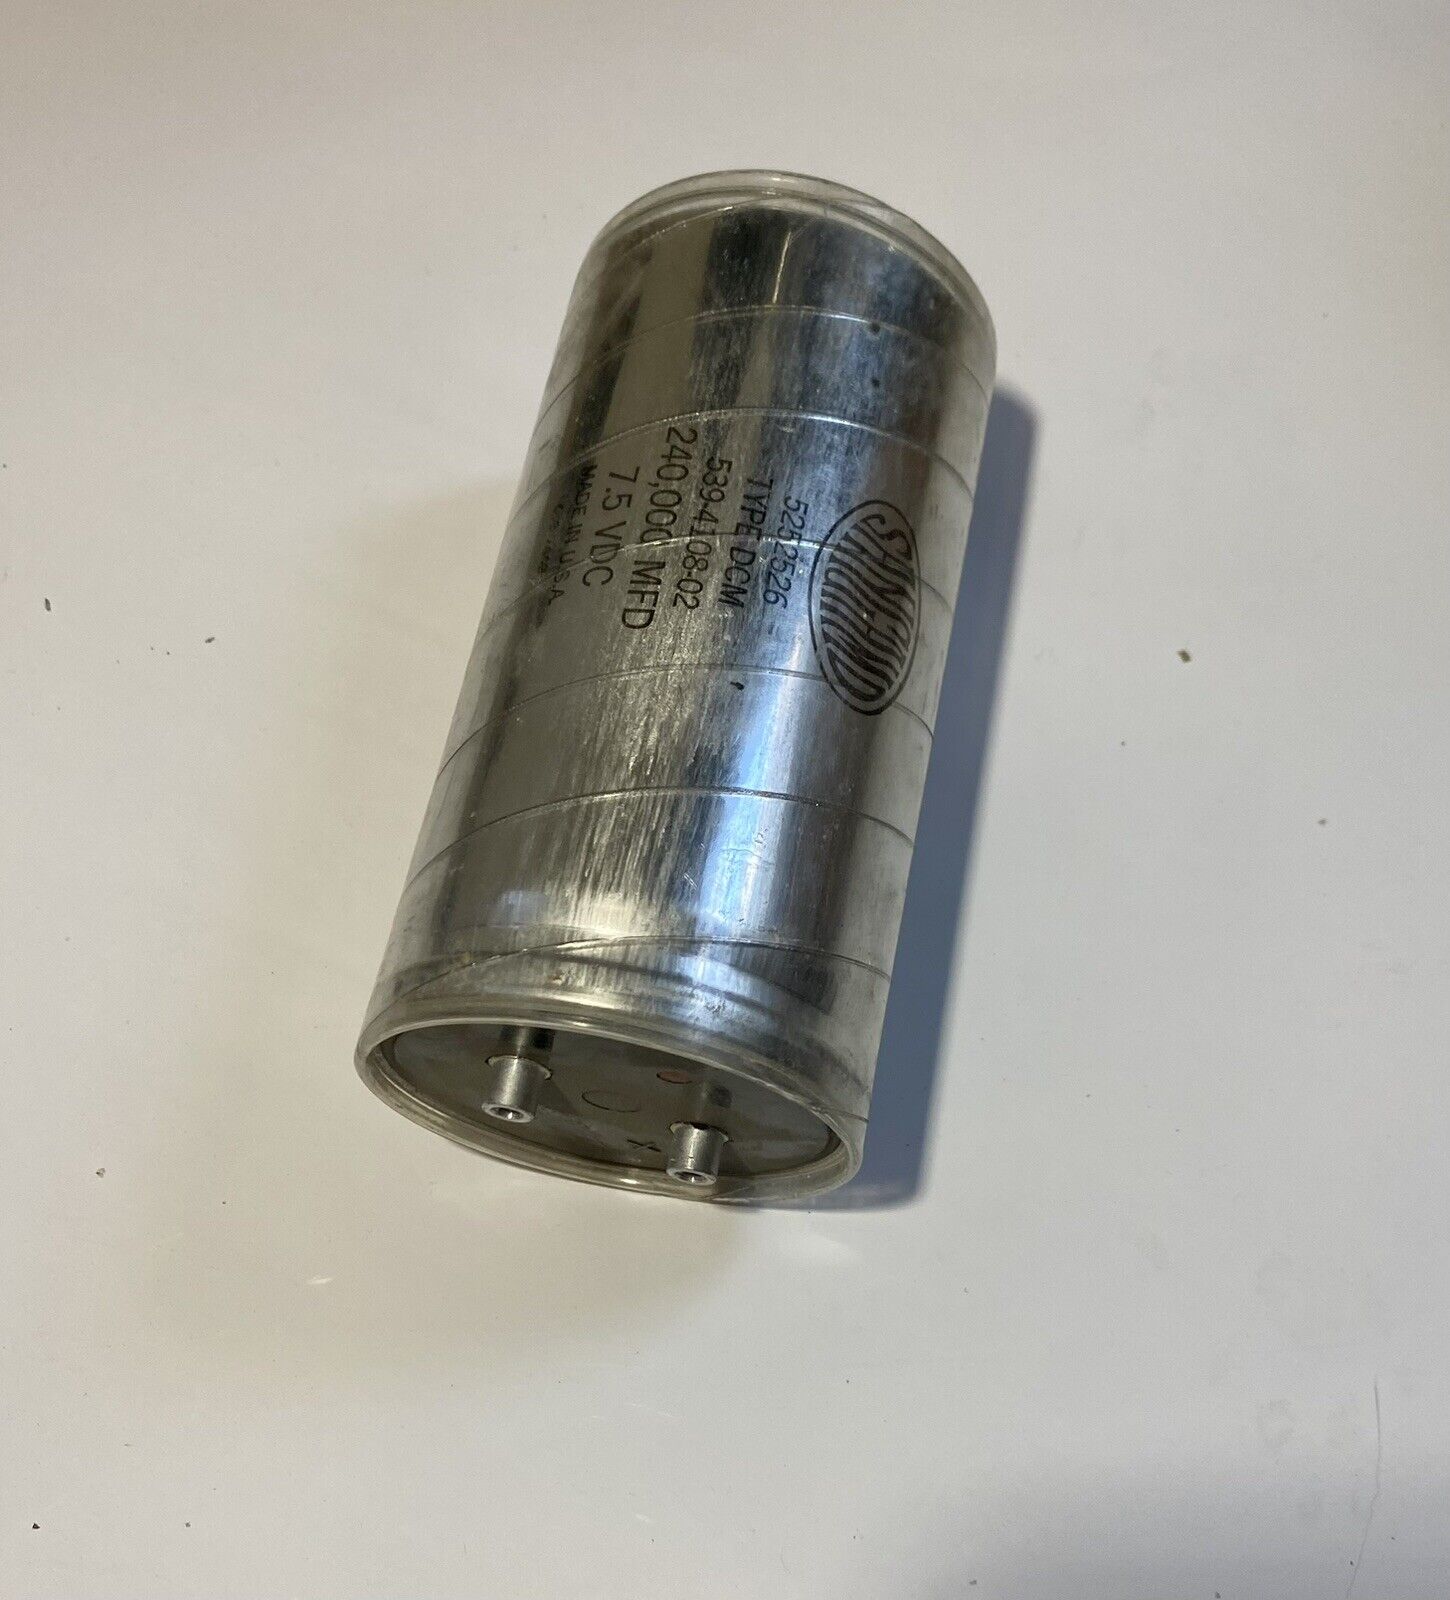 1x 240000uF 7.5V Large Can Electrolyt​ic Capacitor 7.5VDC 240000mfd 240,000